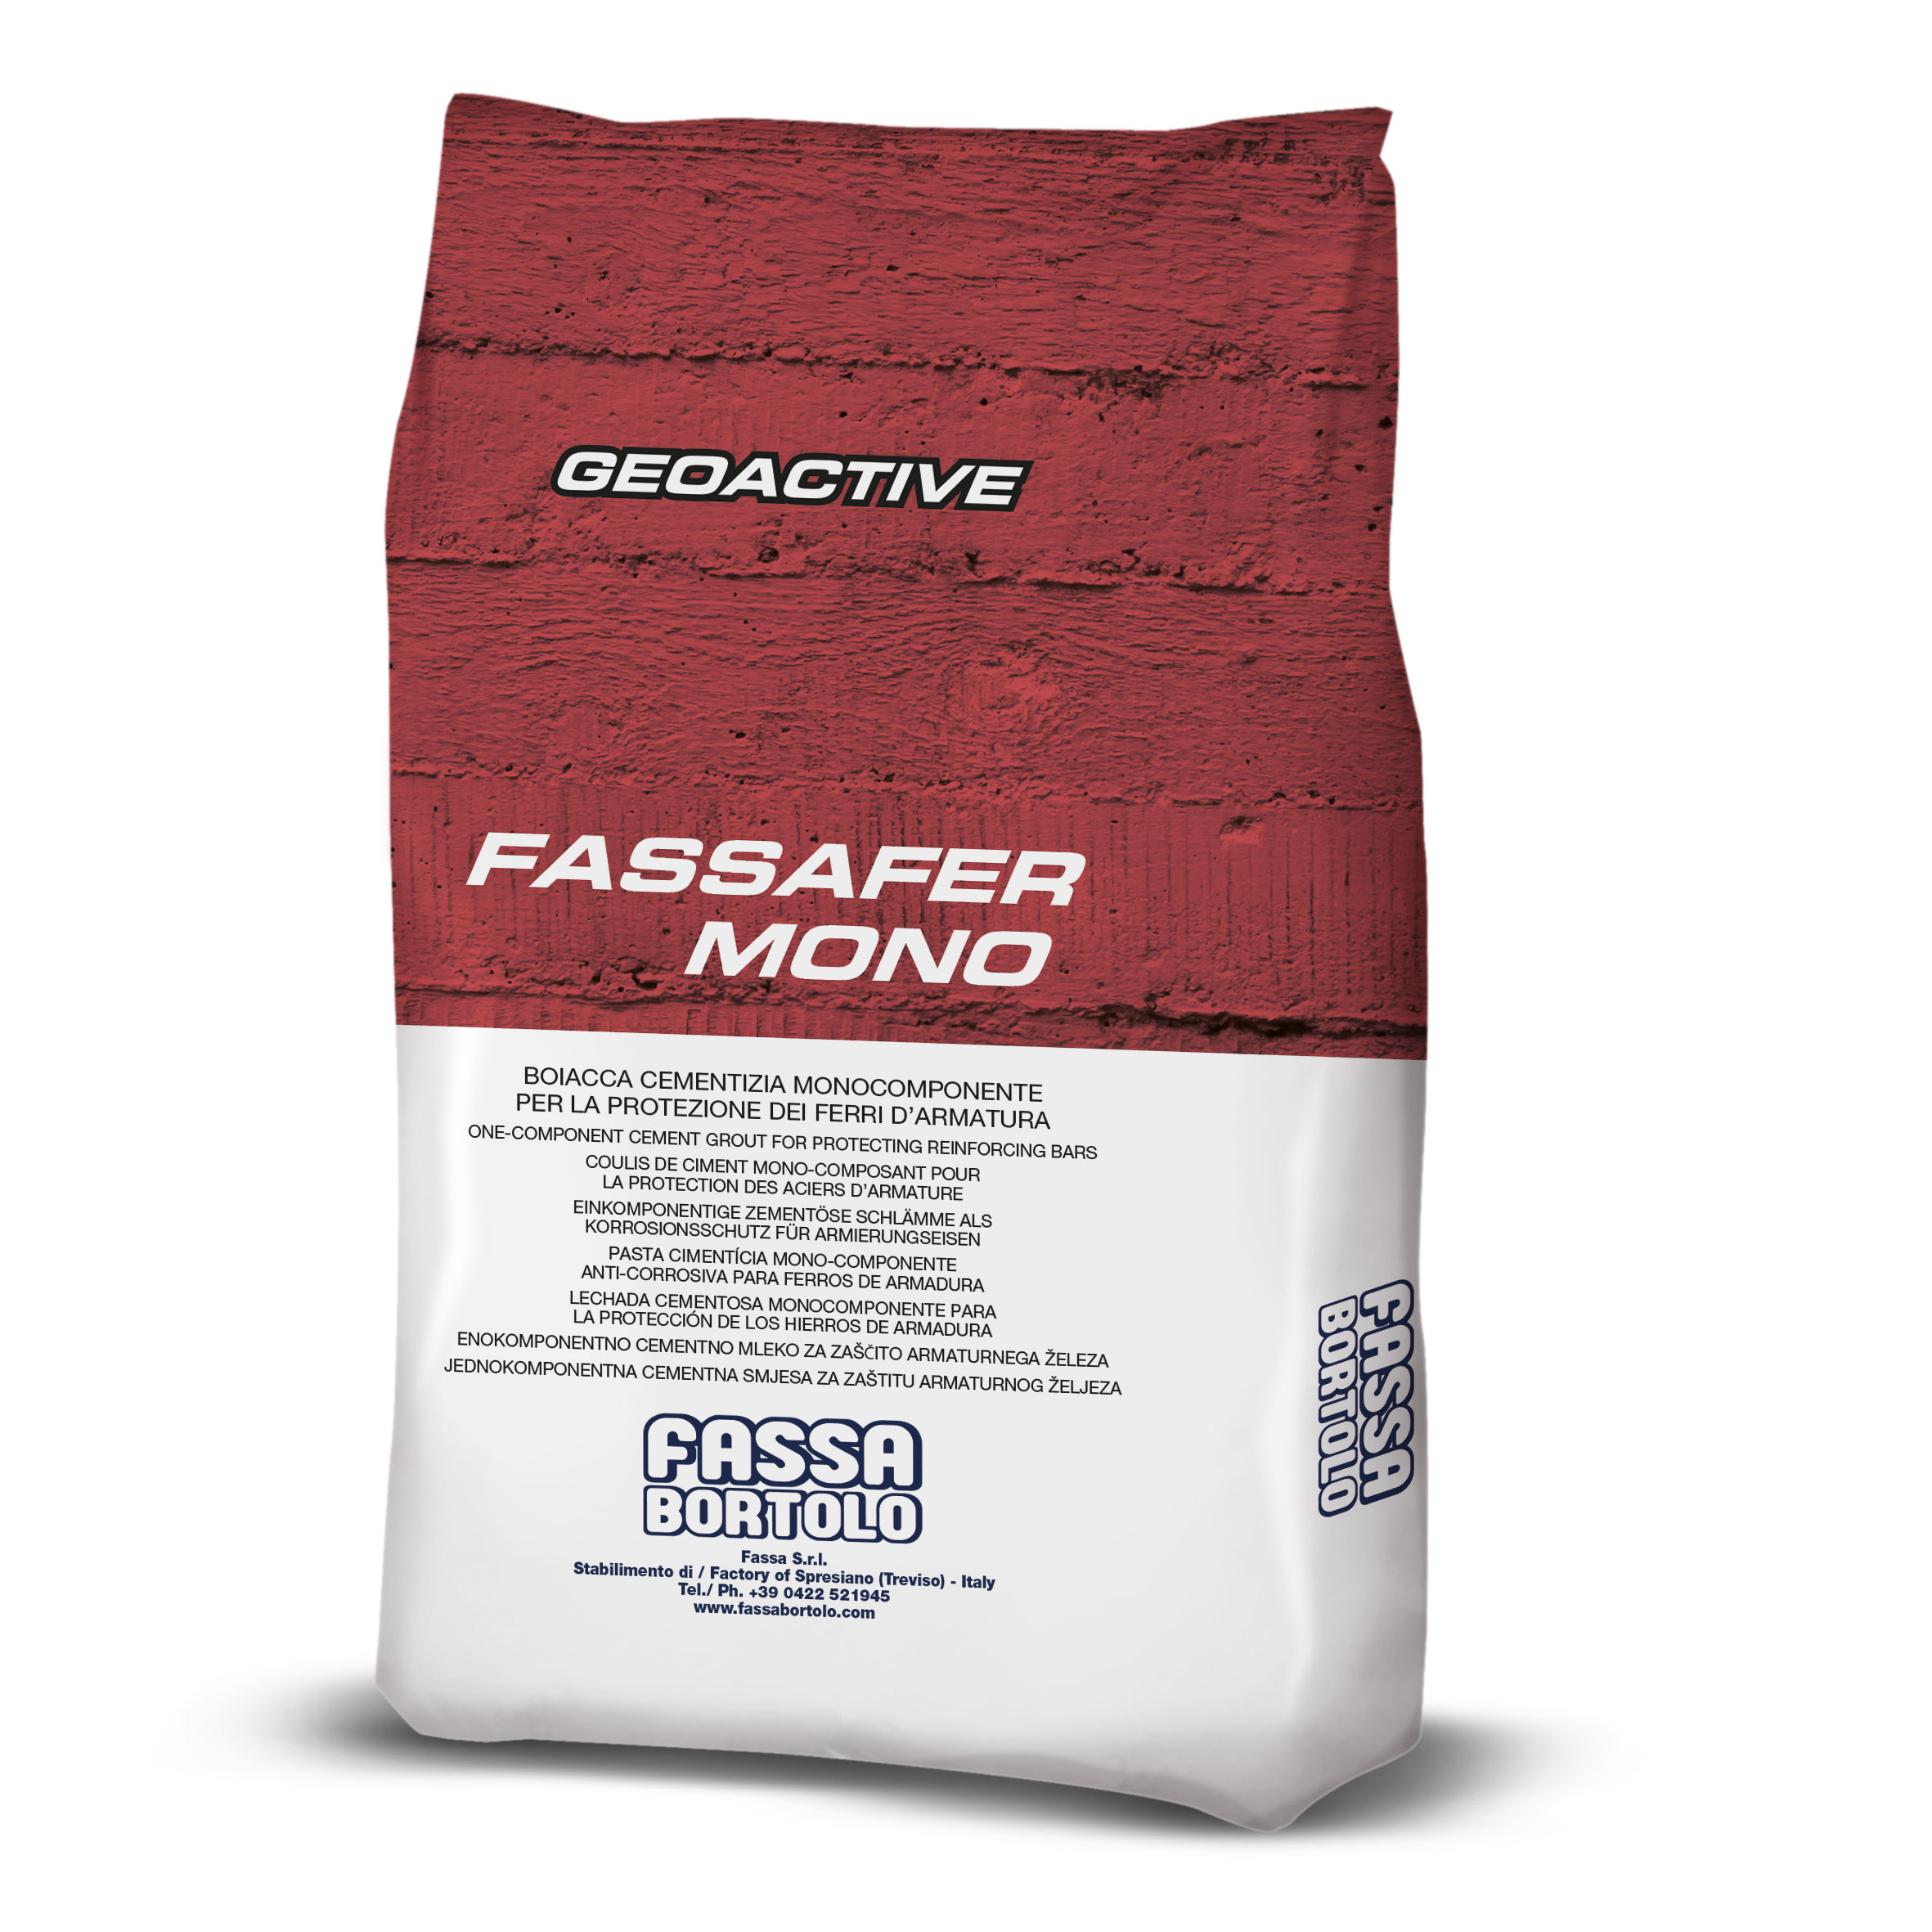 FASSAFER MONO: One-component cementitious treatment for active protection of reinforcing bars